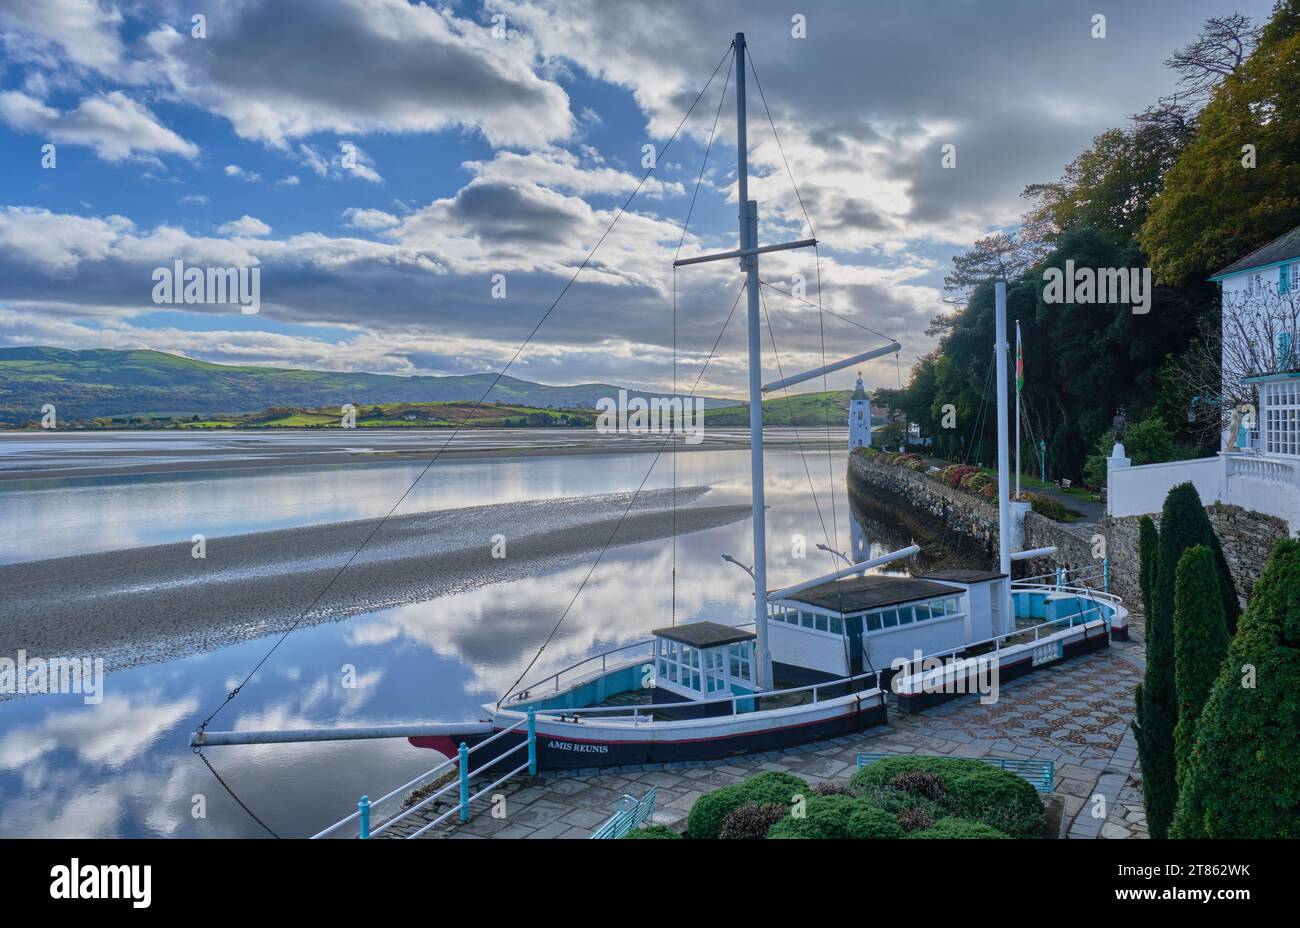 The Amis Reunis and The Watchtower on the quayside by the Afon Dwyryd Estuary, Portmeirion, Gwynedd, Wales Stock Photo